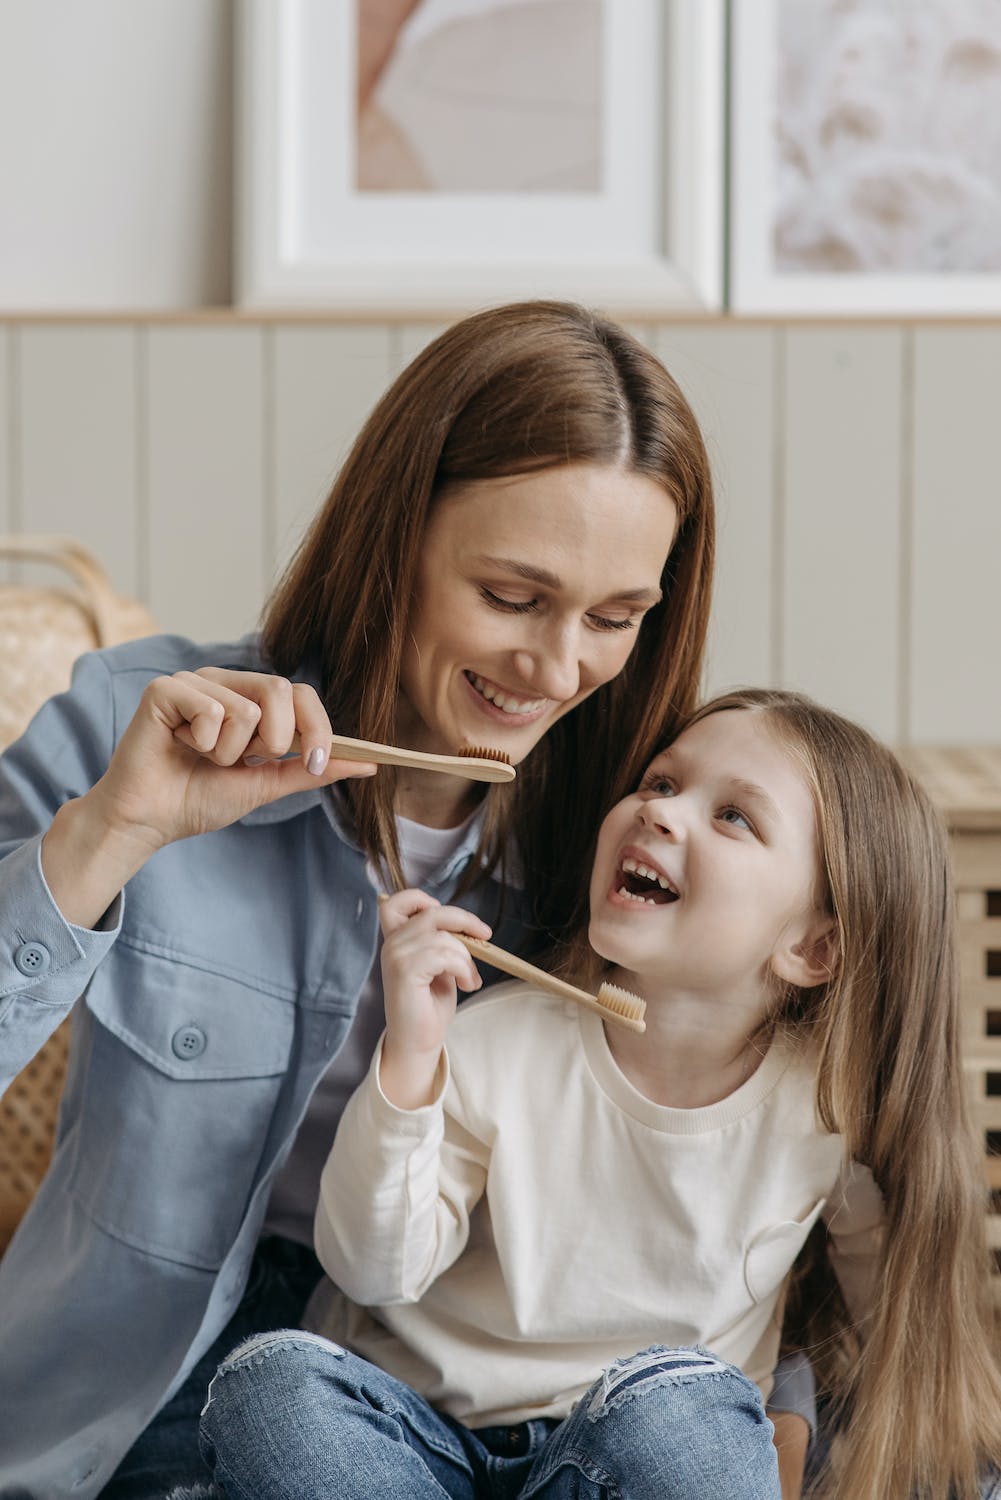 A mom and child brushing teeth